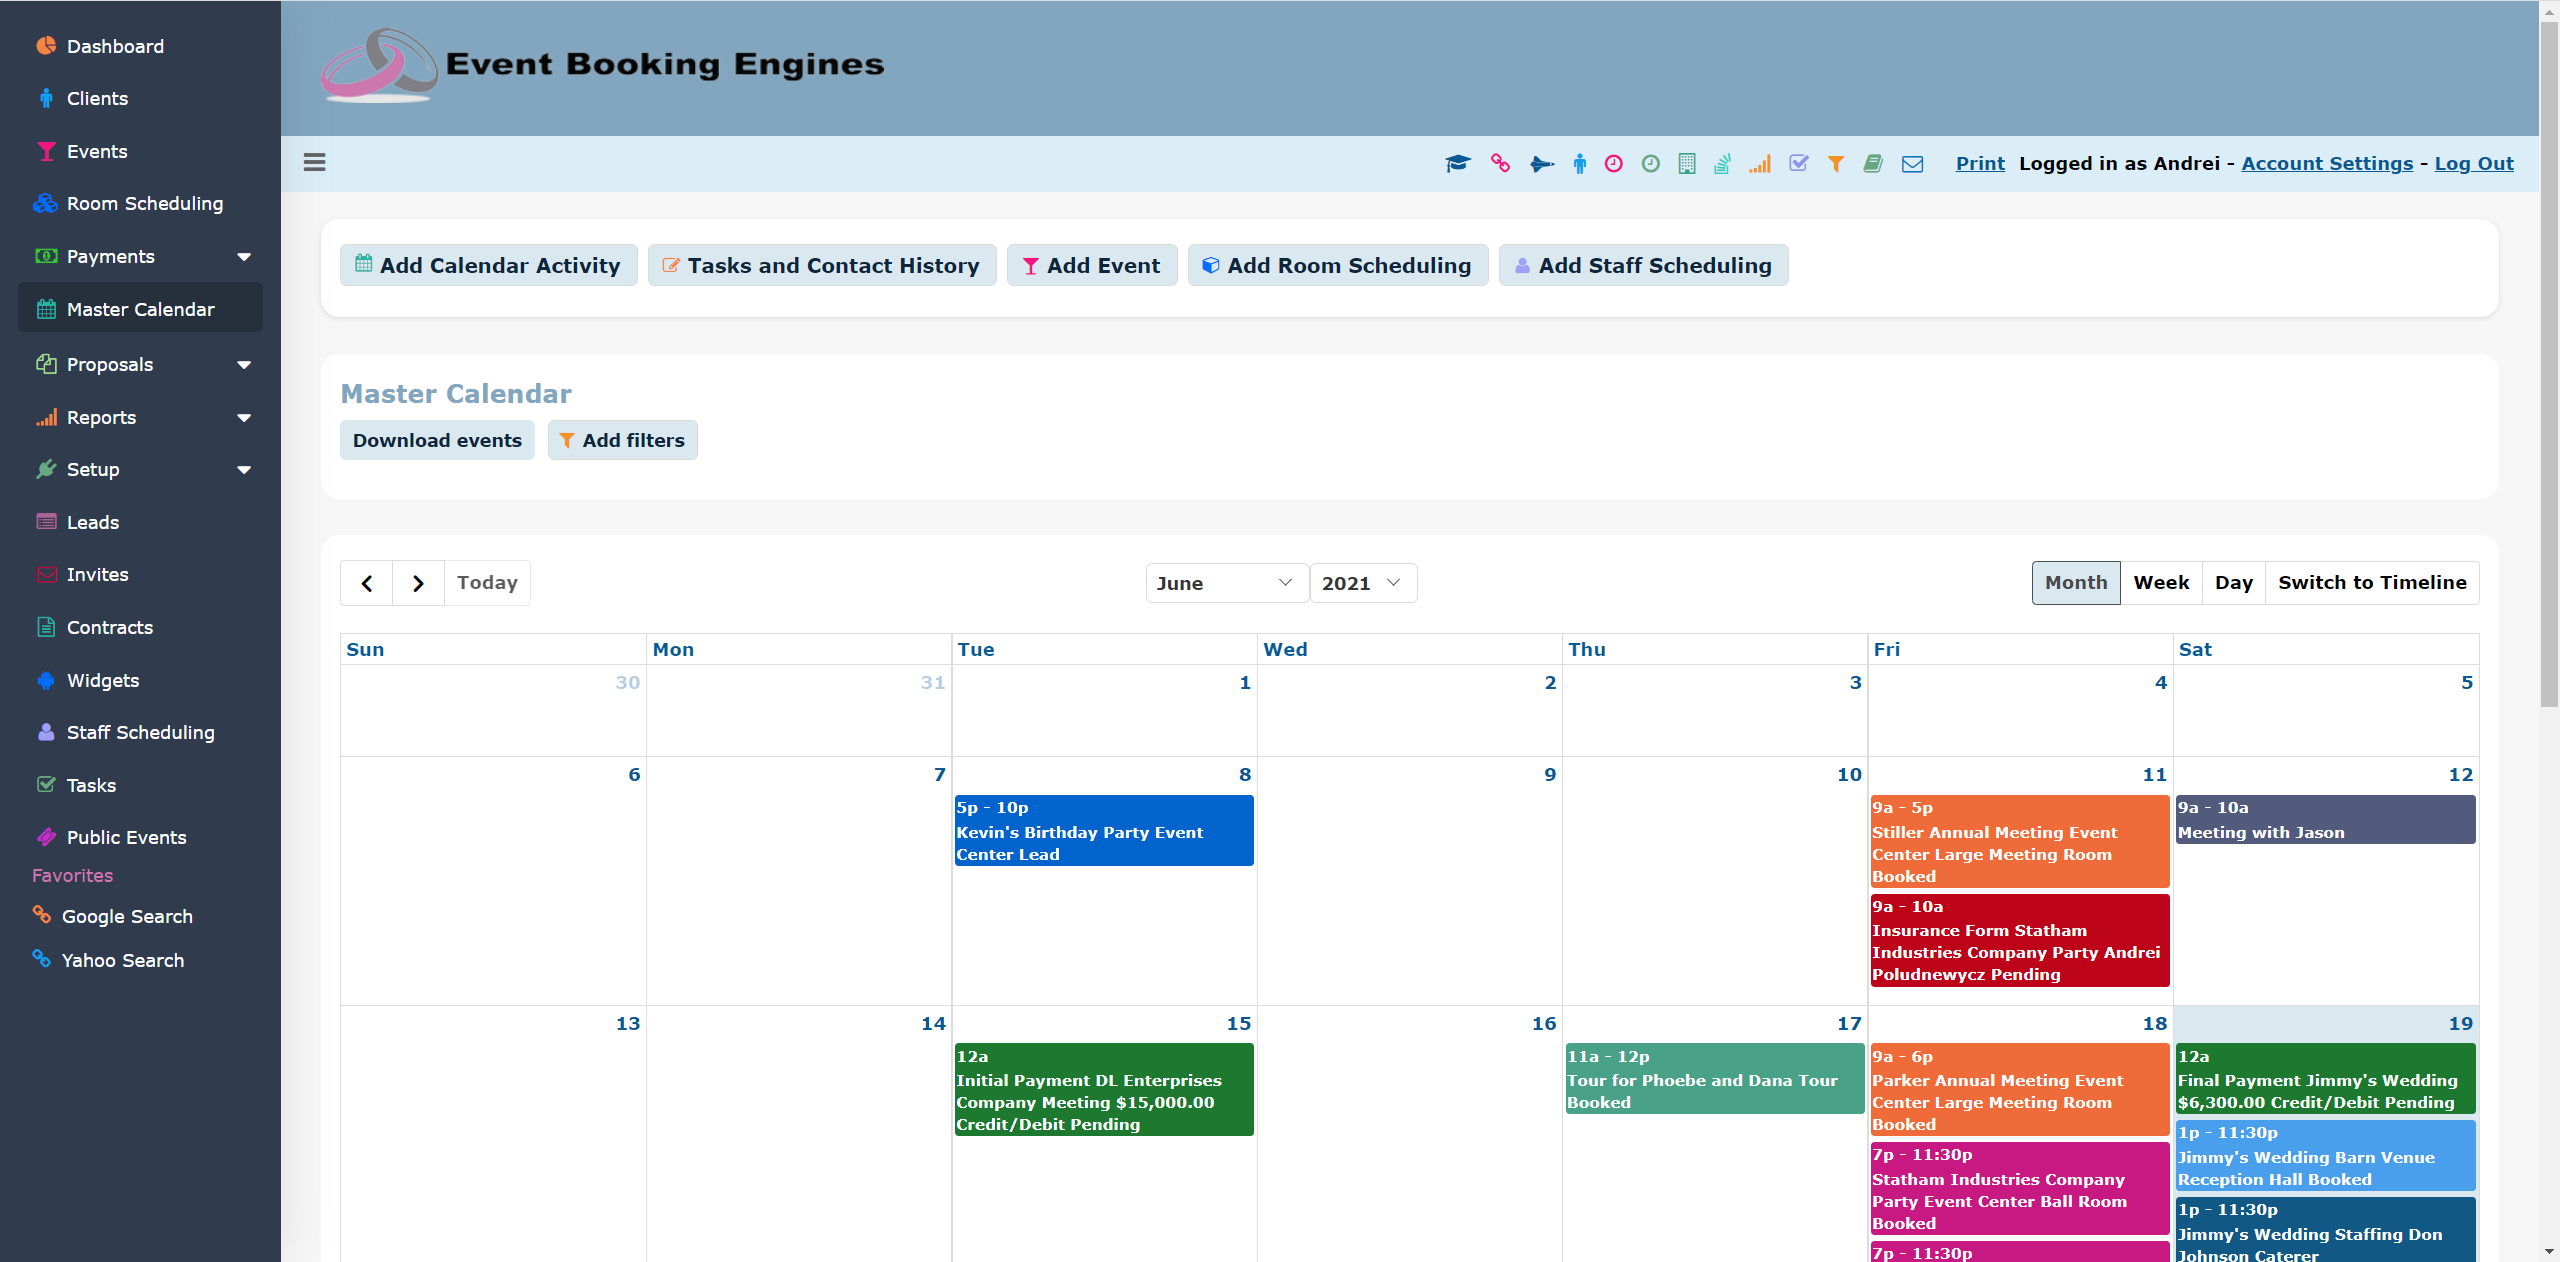 Event Booking Engines Software - 4